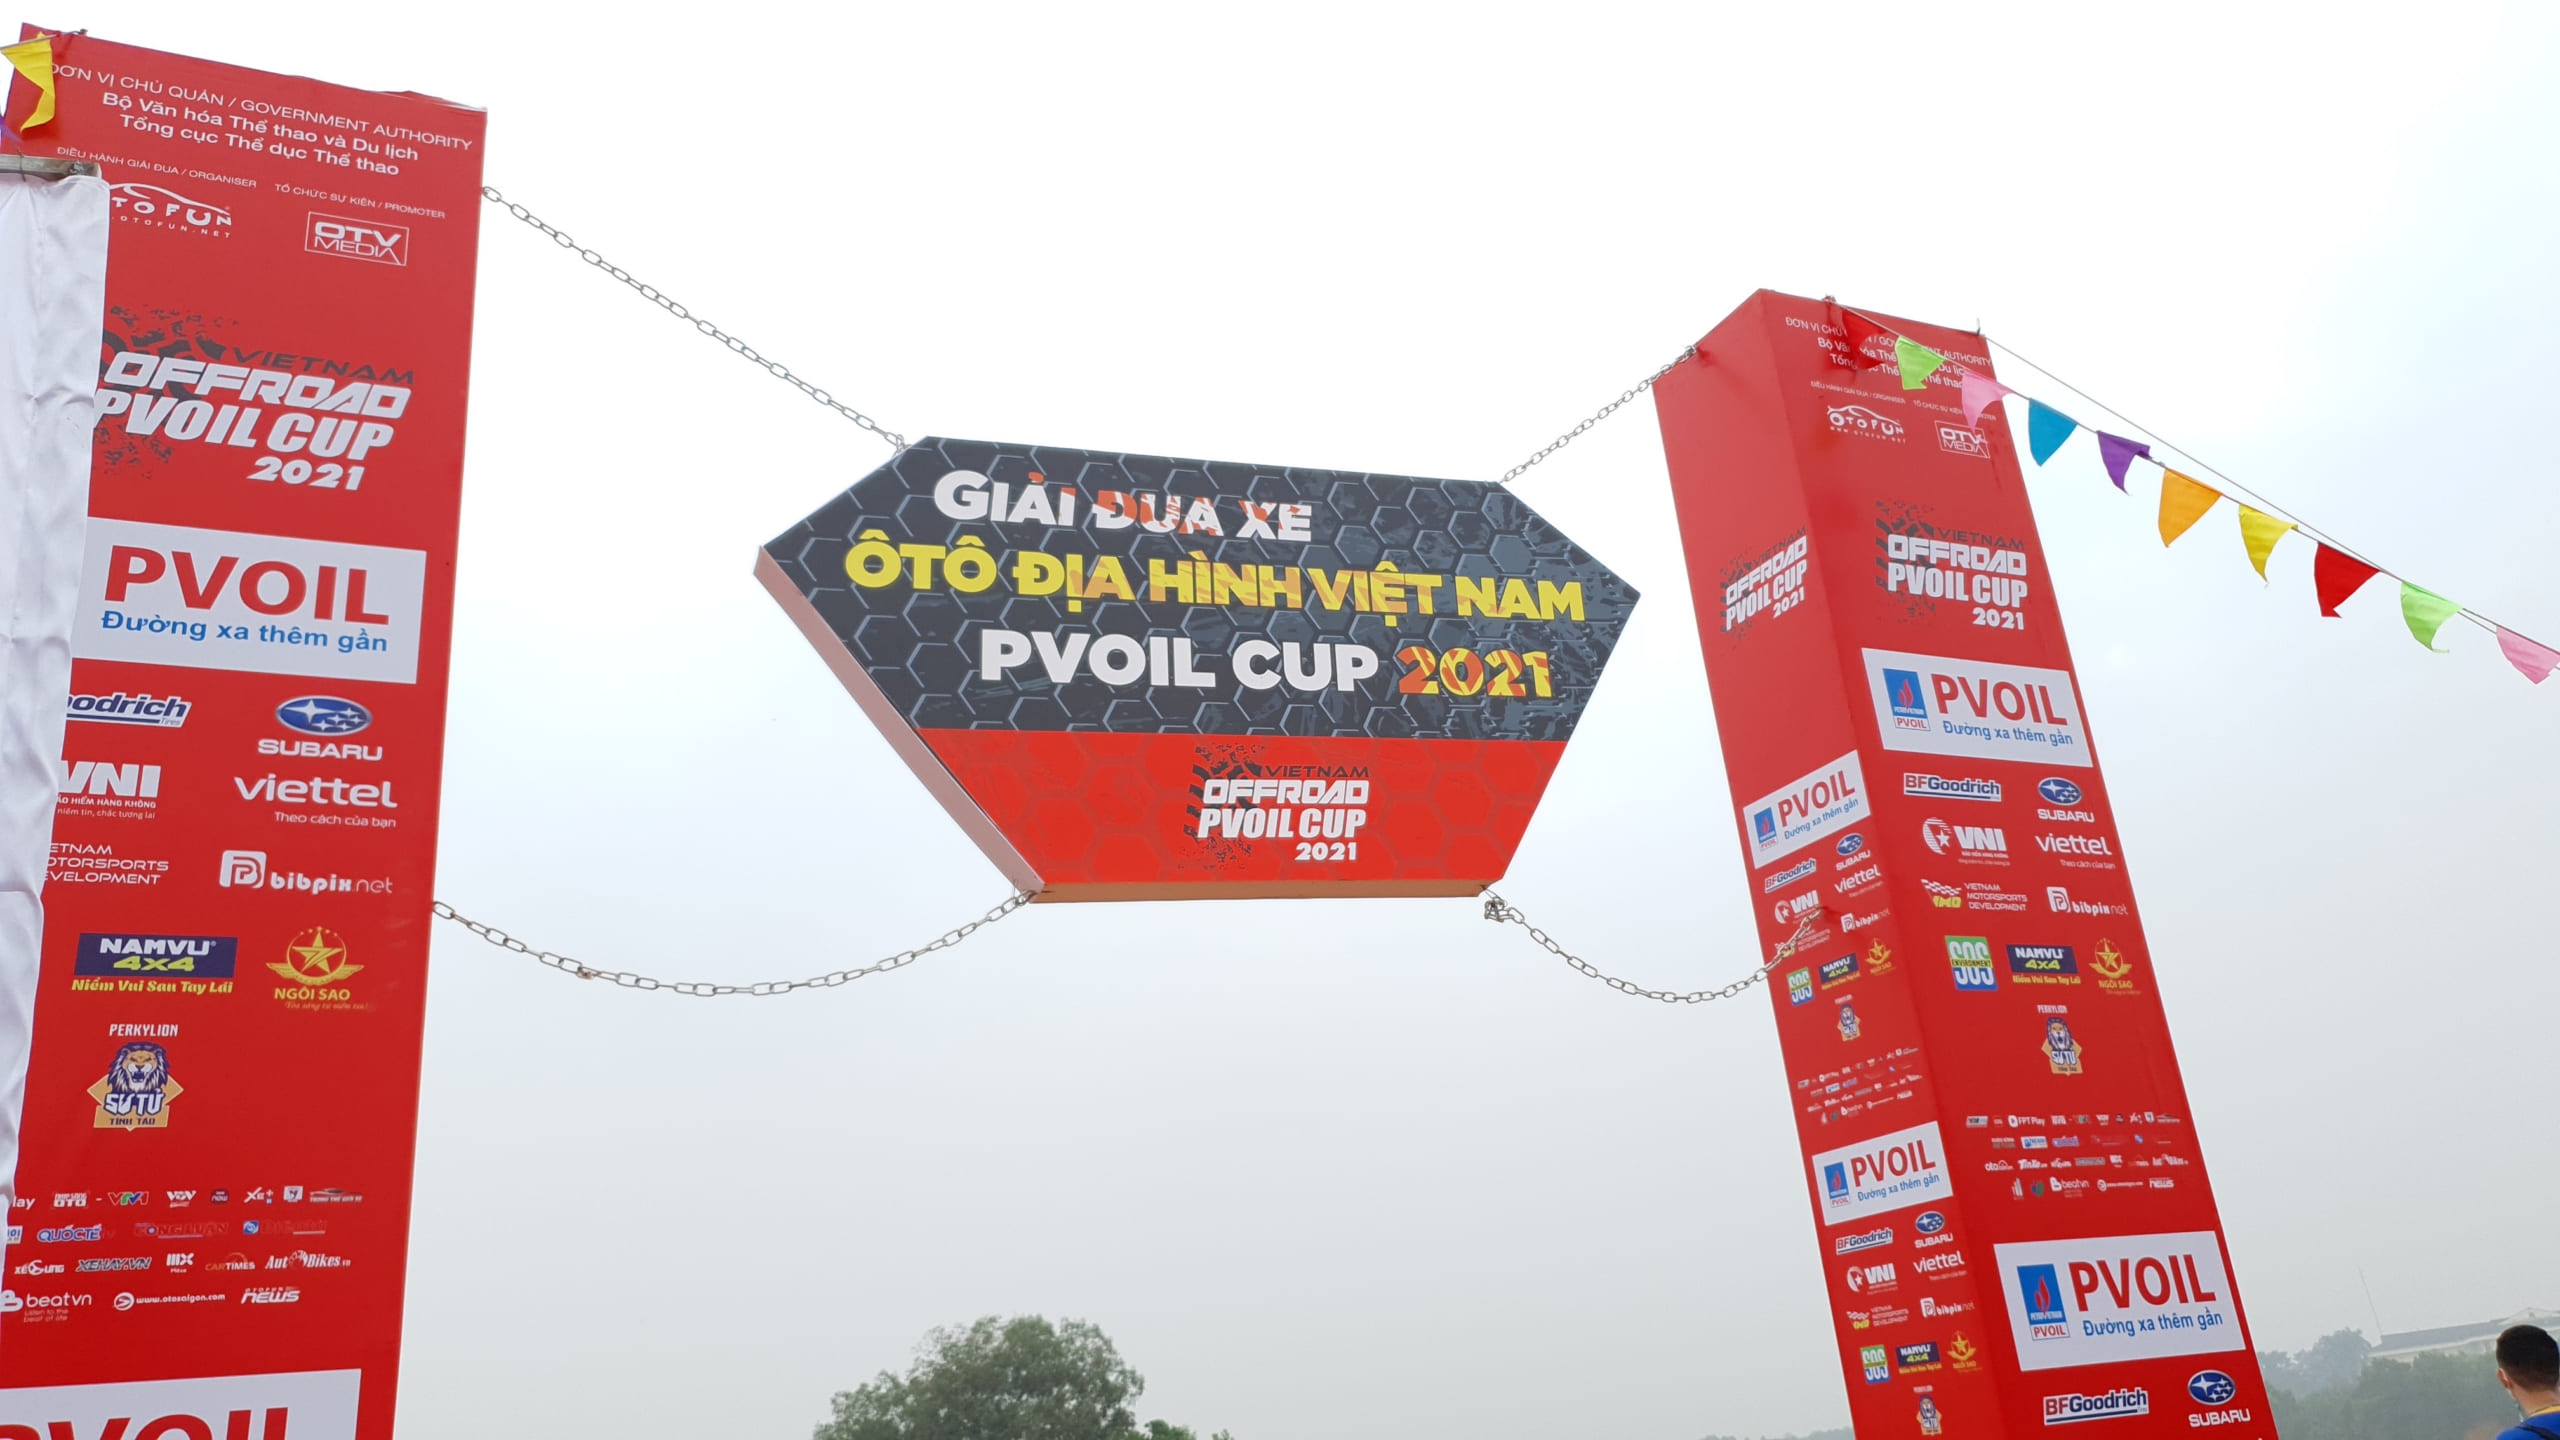 Pvoil cup 2021